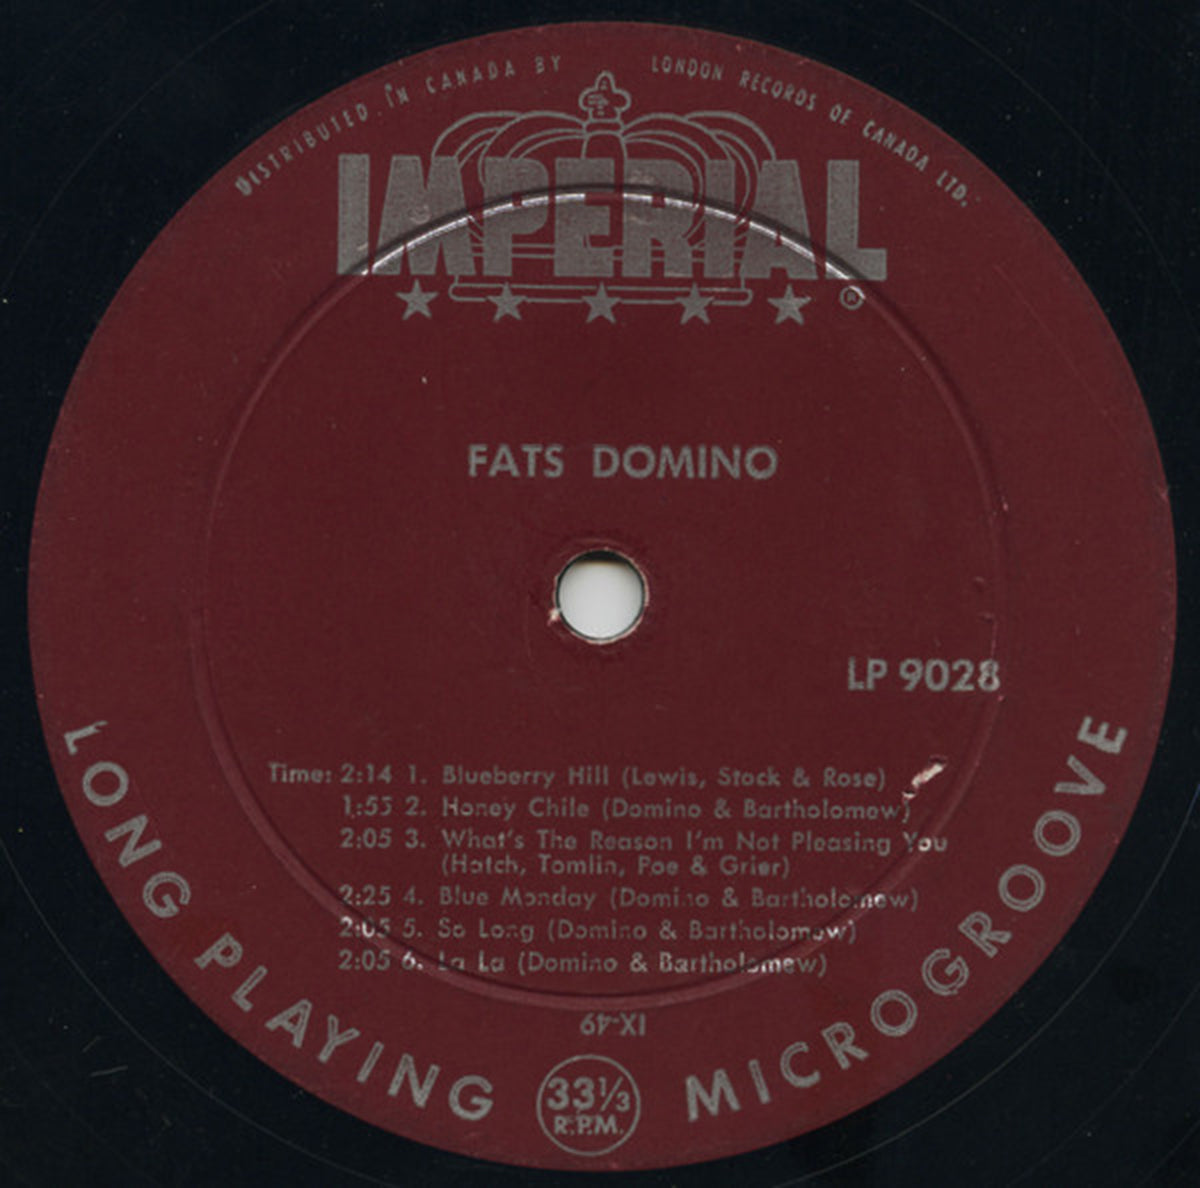 Fats Domino – This Is Fats Domino! -